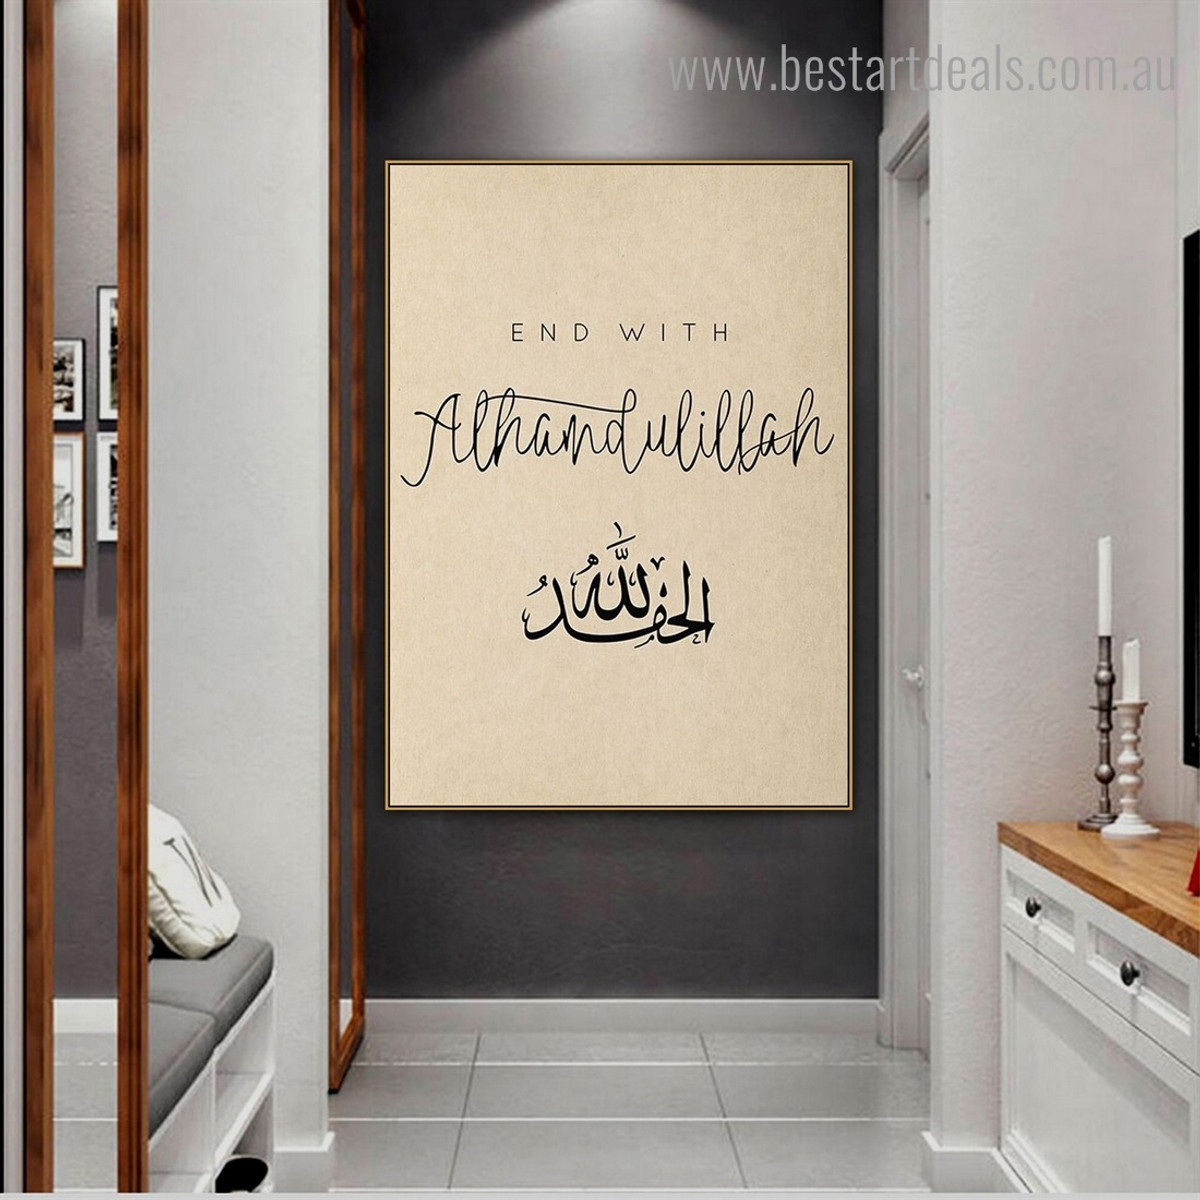 Alhamdulillah Religious Framed Painting Portrait Canvas Print for Room Wall Decor
